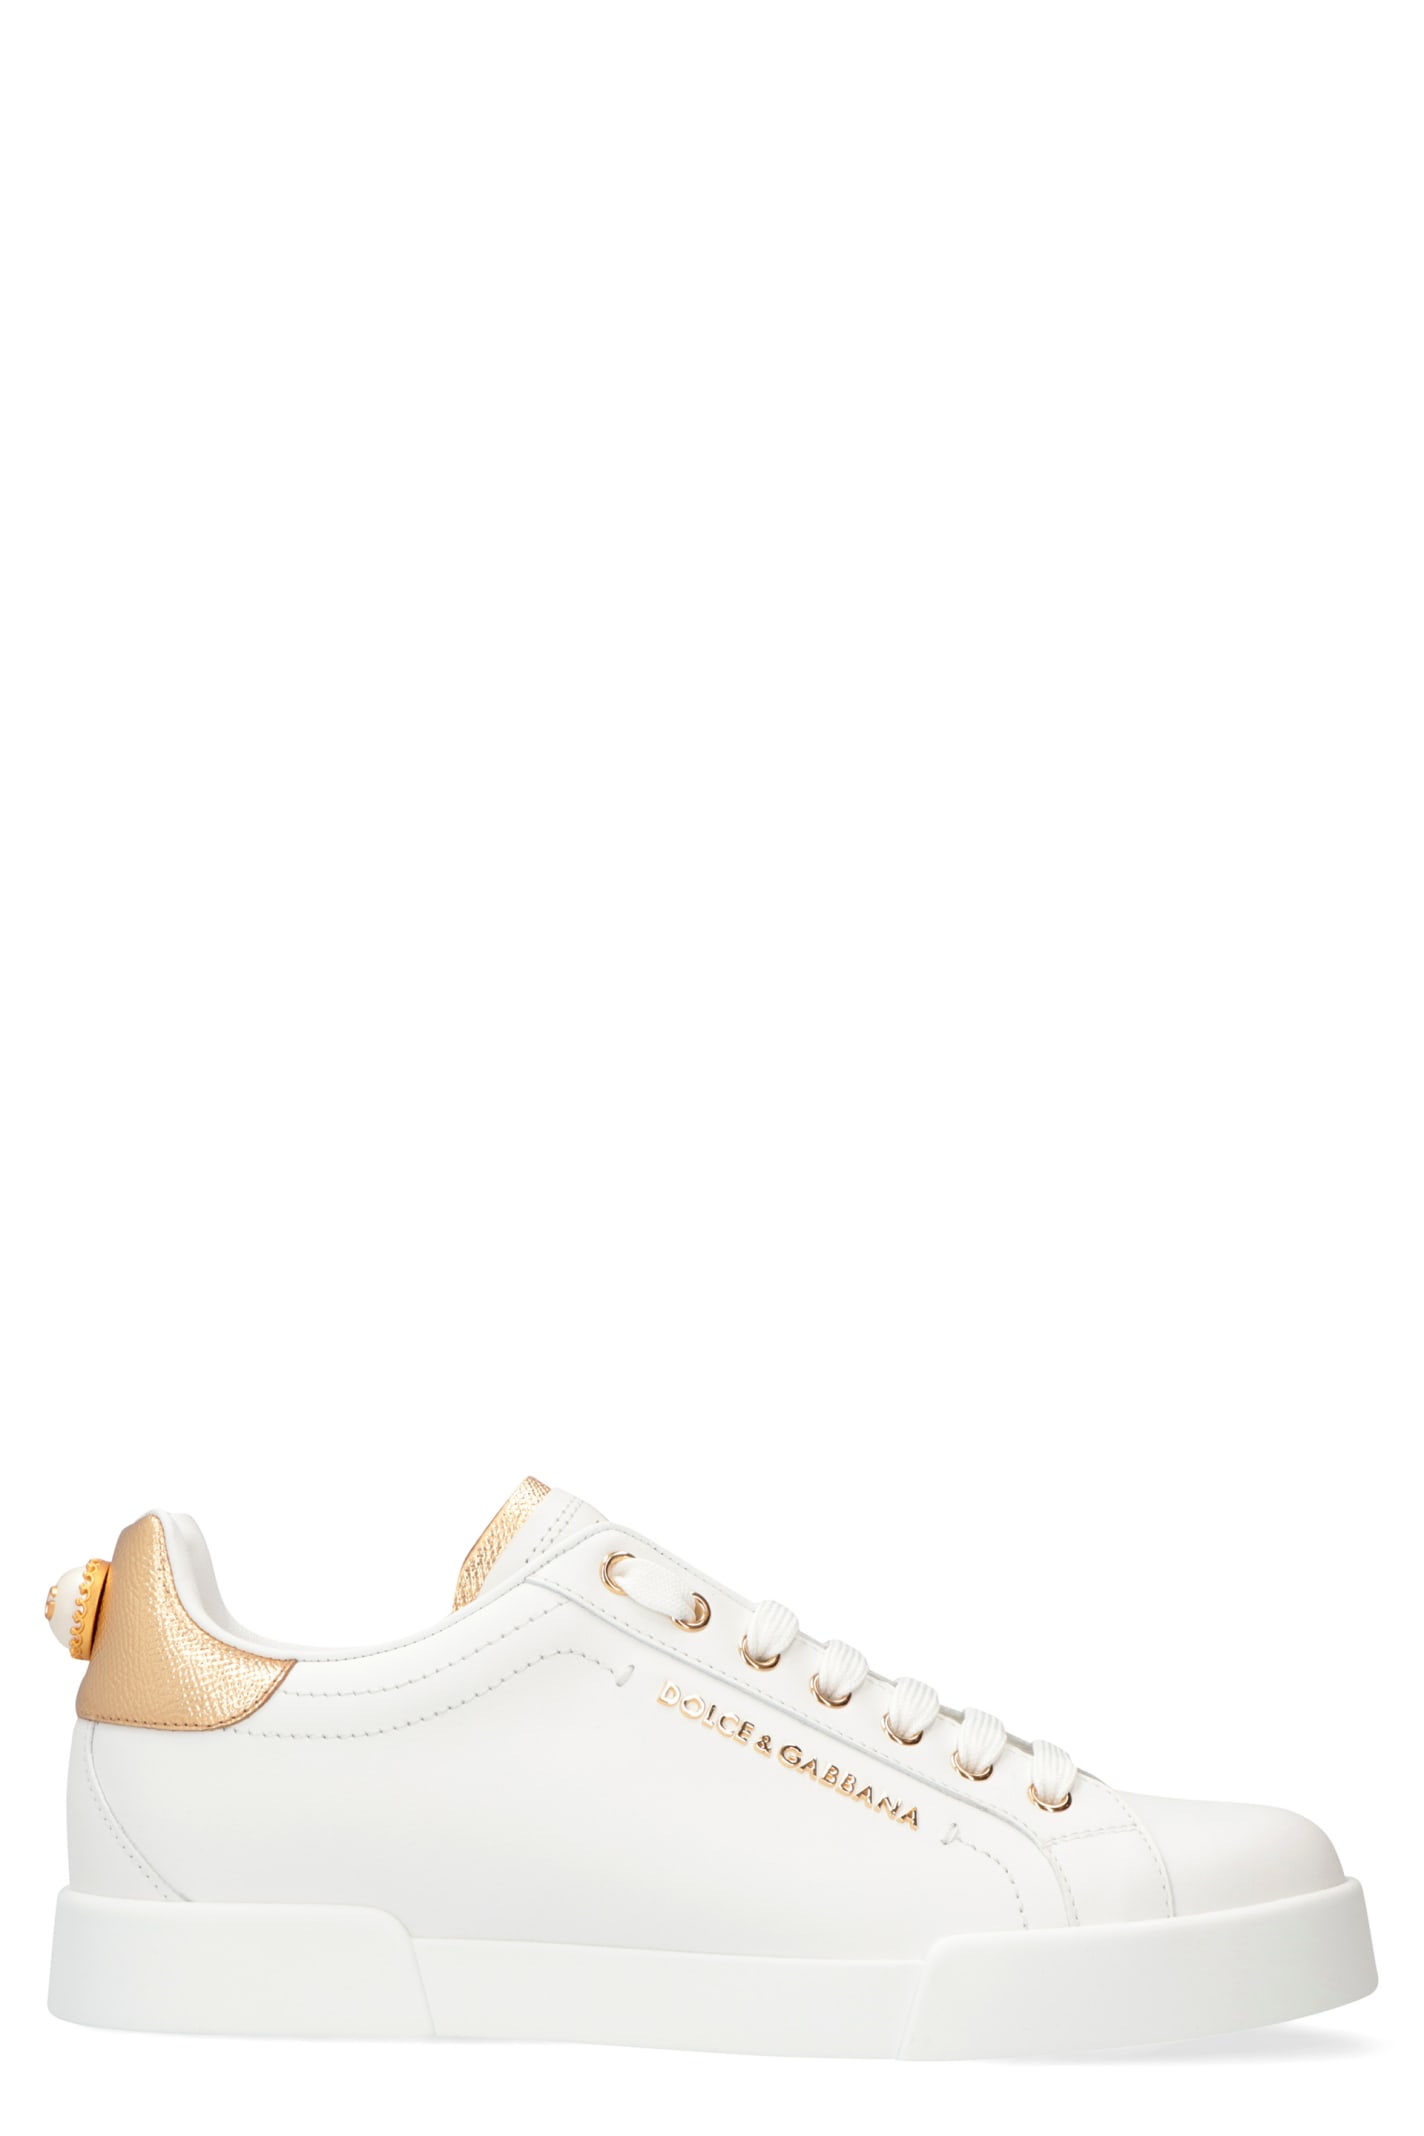 Buy Dolce & Gabbana Portofino Leather Low-top Sneakers online, shop Dolce & Gabbana shoes with free shipping